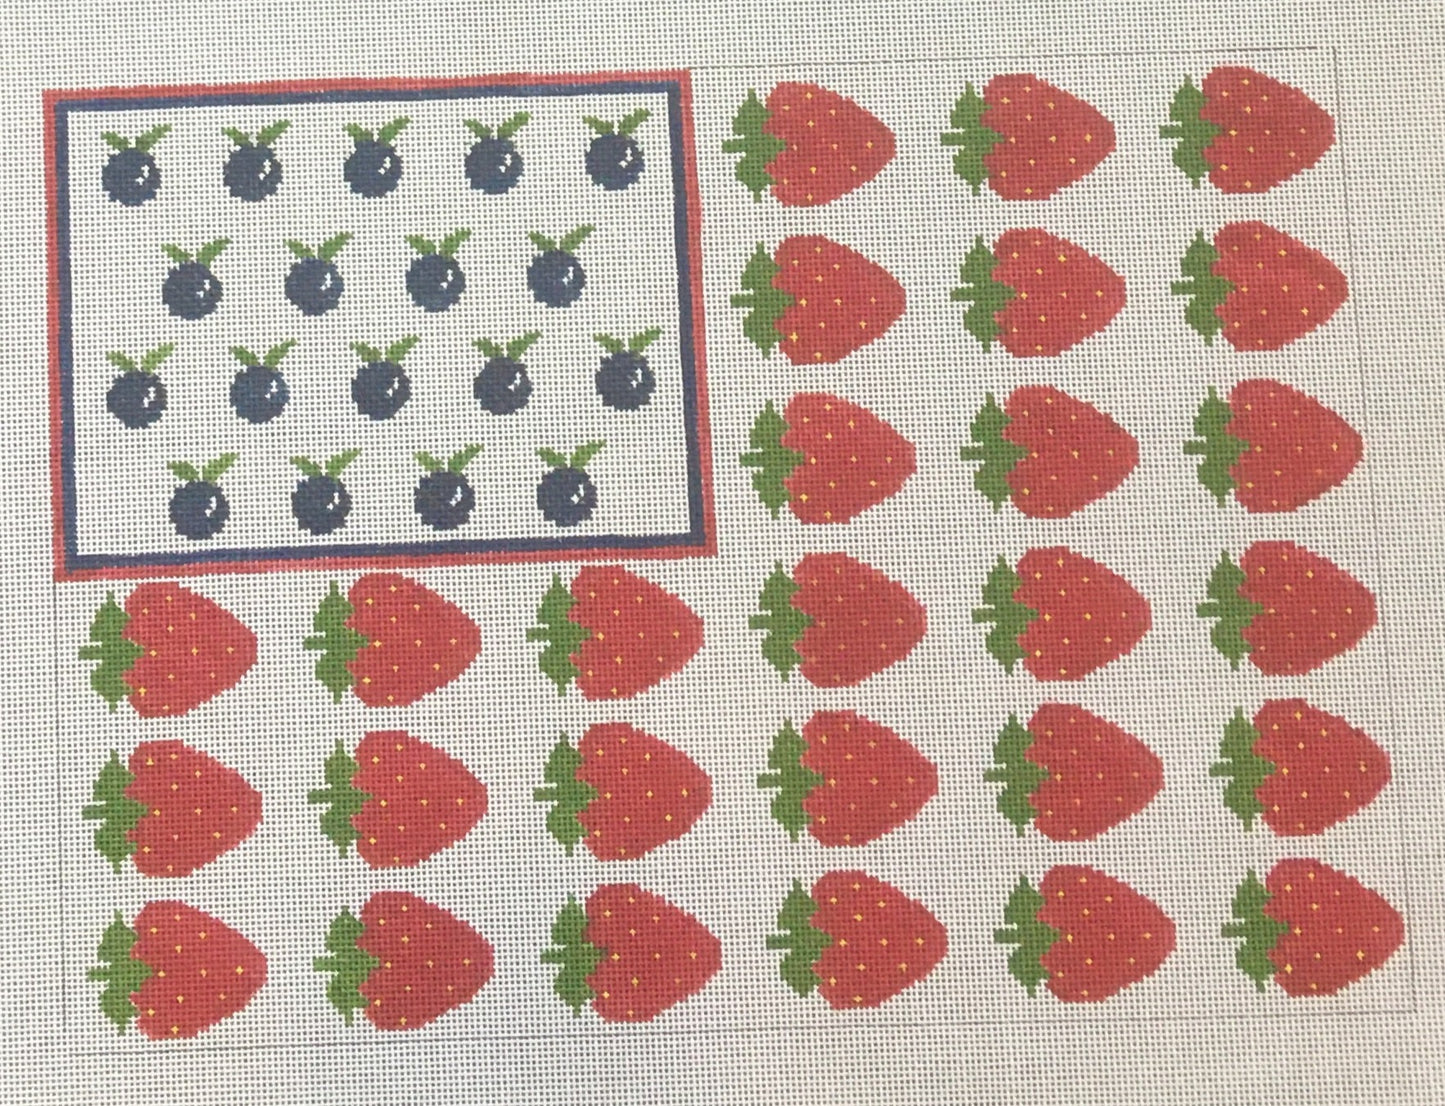 HSN32 Strawberries and Blueberries Flag